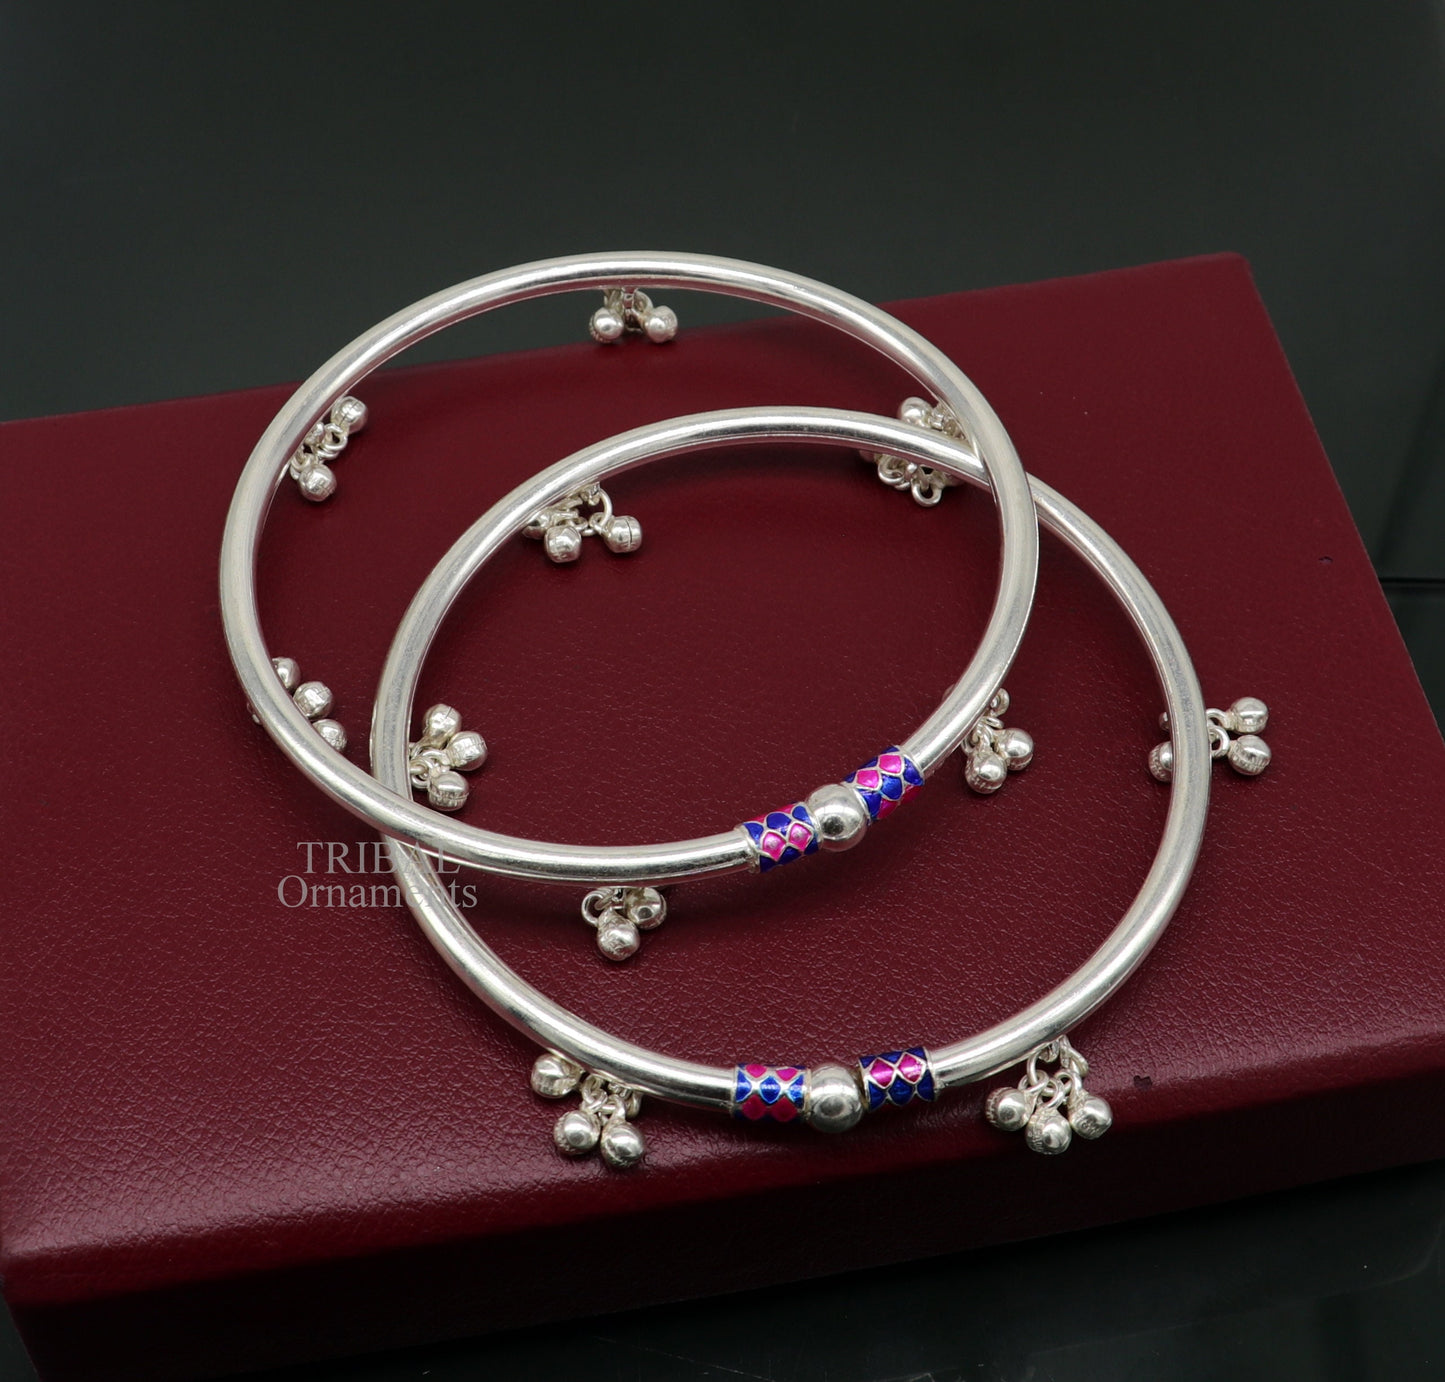 925 sterling silver handmade amazing foot ankle plain bracelet kada with hanging noisy bells, belly dance jewelry from Rajasthan nsfk58 - TRIBAL ORNAMENTS